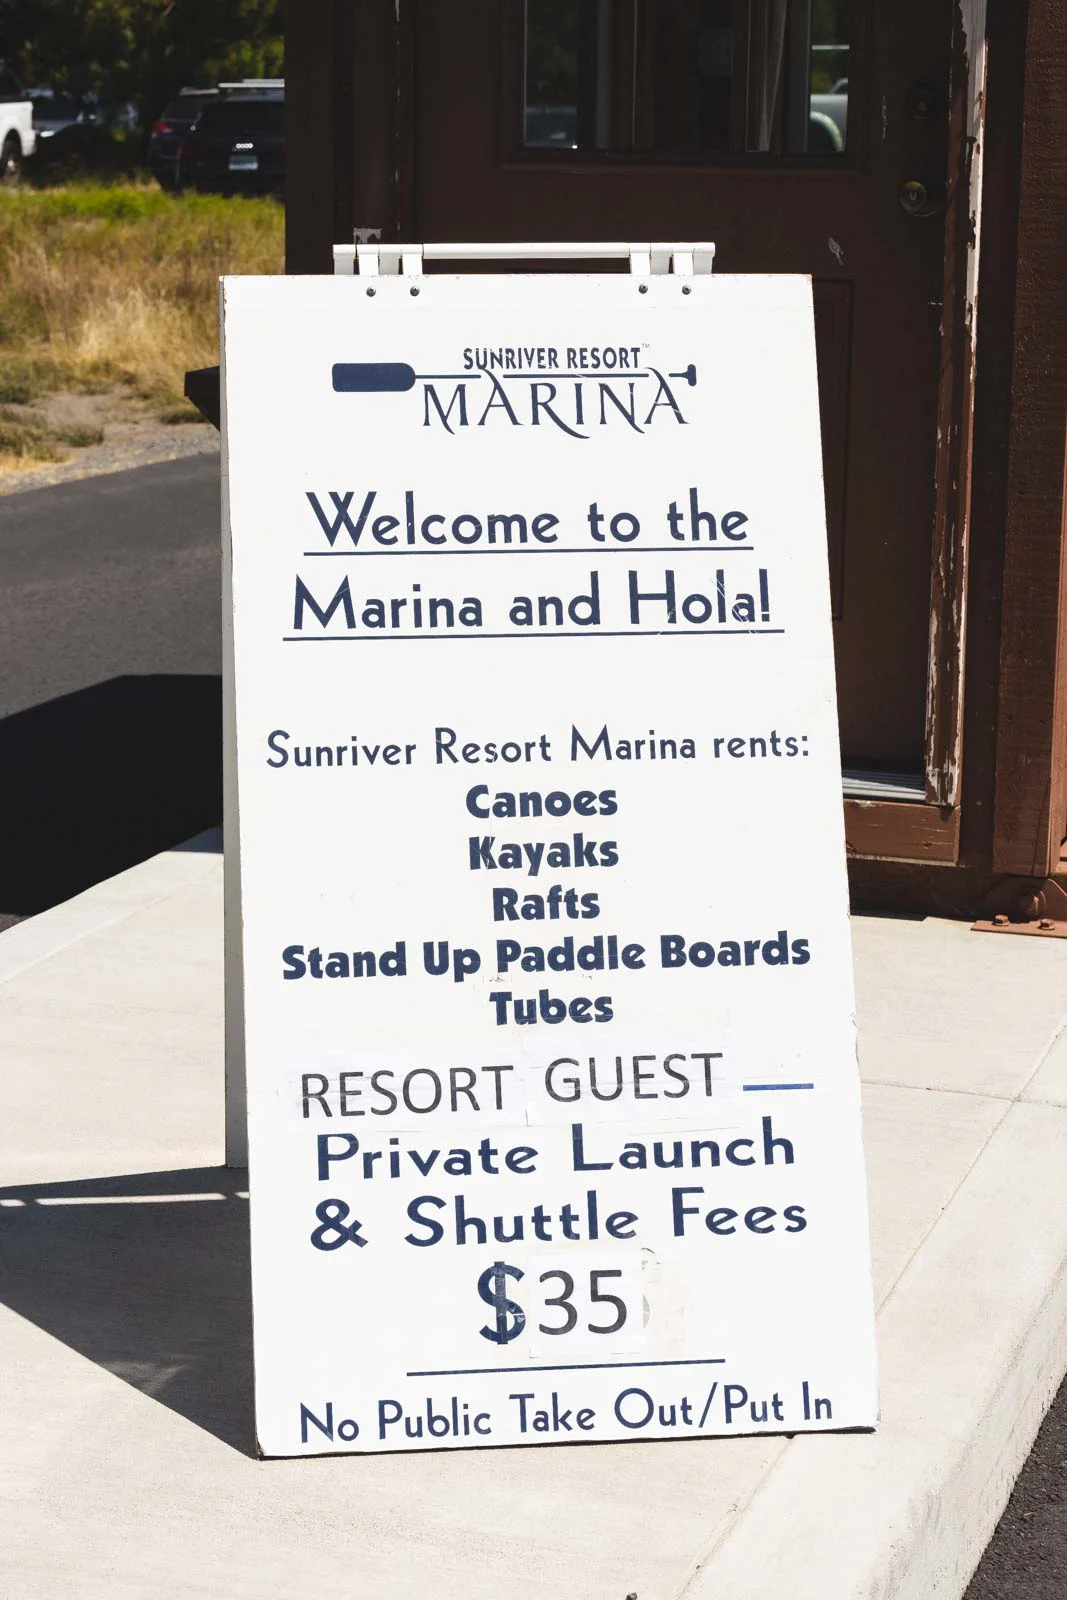 If you're looking for fun things to do in Sunriver, head to Sunriver Marina and get some outdoor equipment.